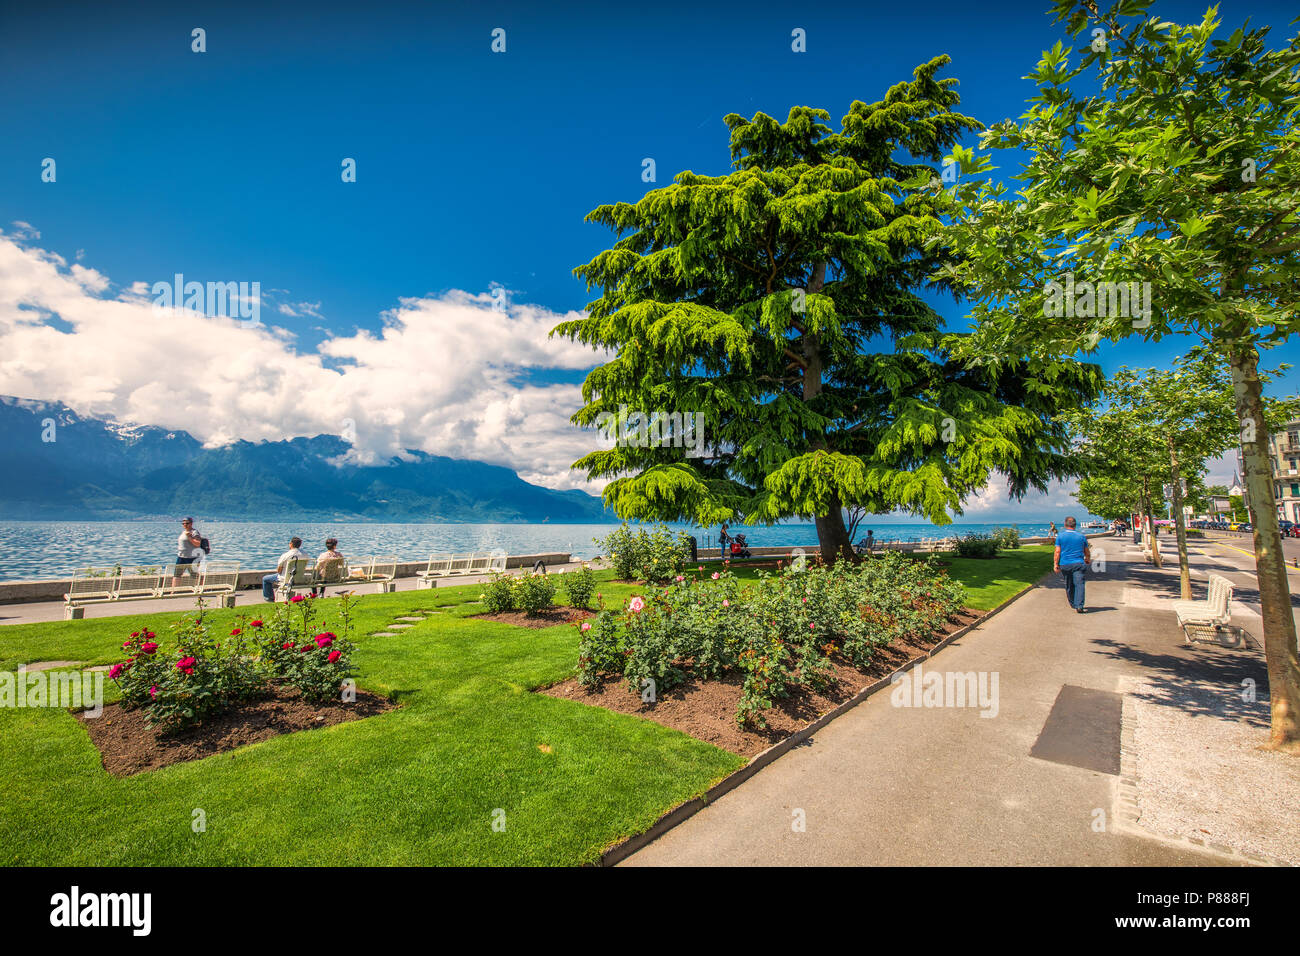 VEVEY, SWITZERLAND - May 31, 2018 - Park in Vevey town near Montreux with Swiss Alps in background, Switzerland, Europe. Stock Photo